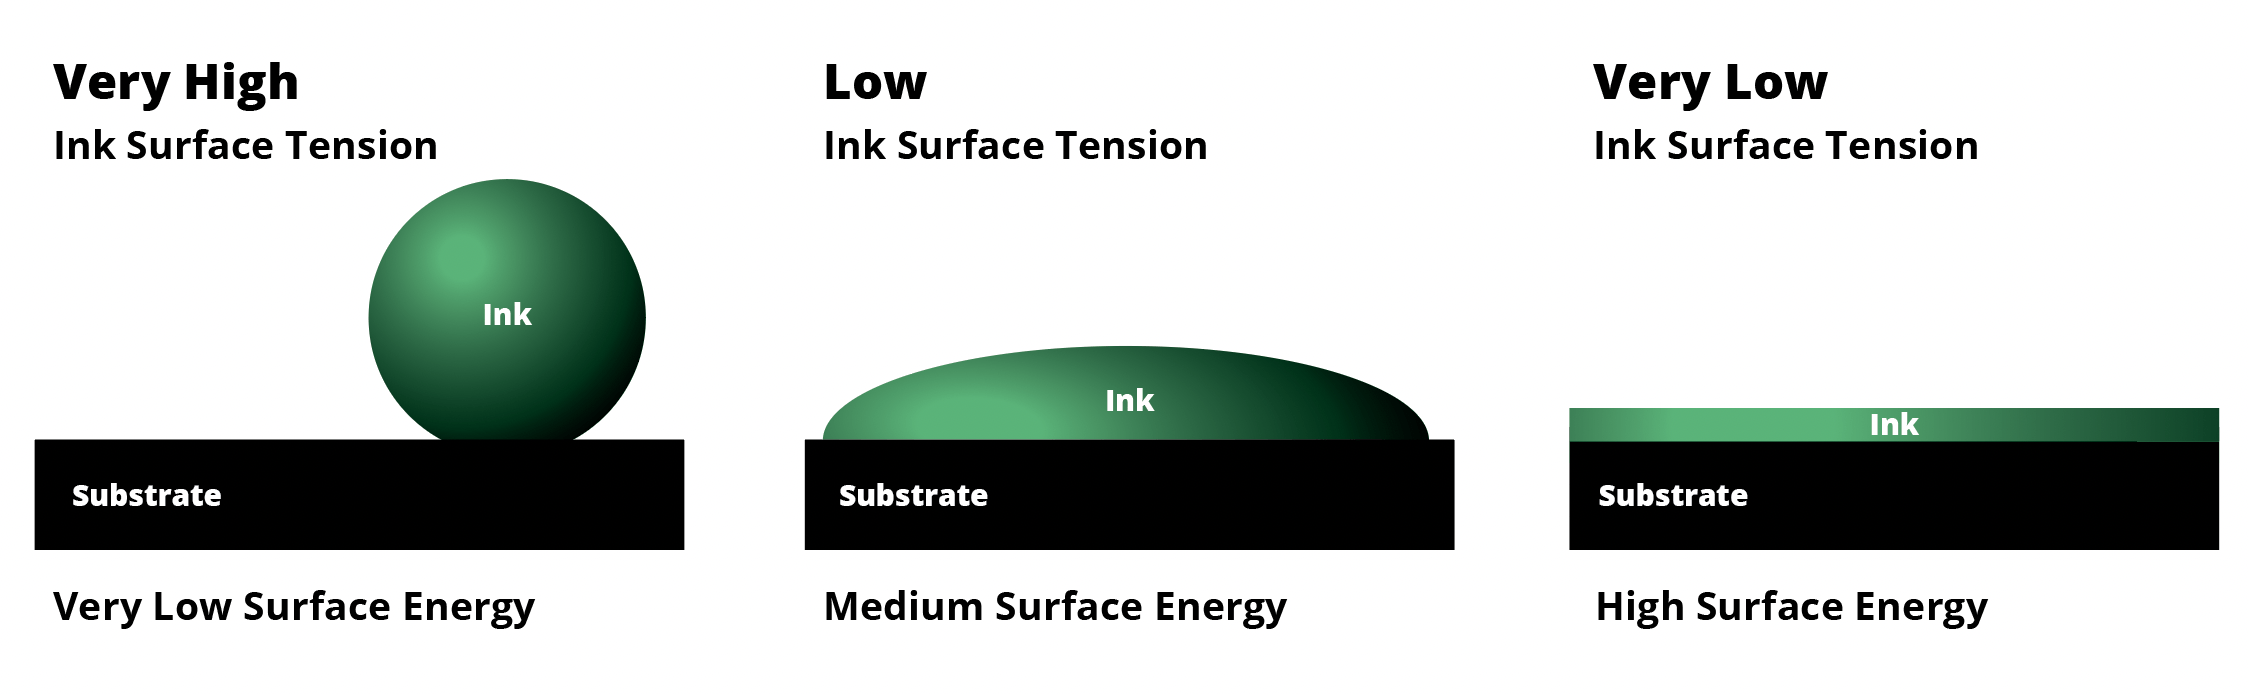 illustration showing relationship of surface tension of ink and surface energy of substrate